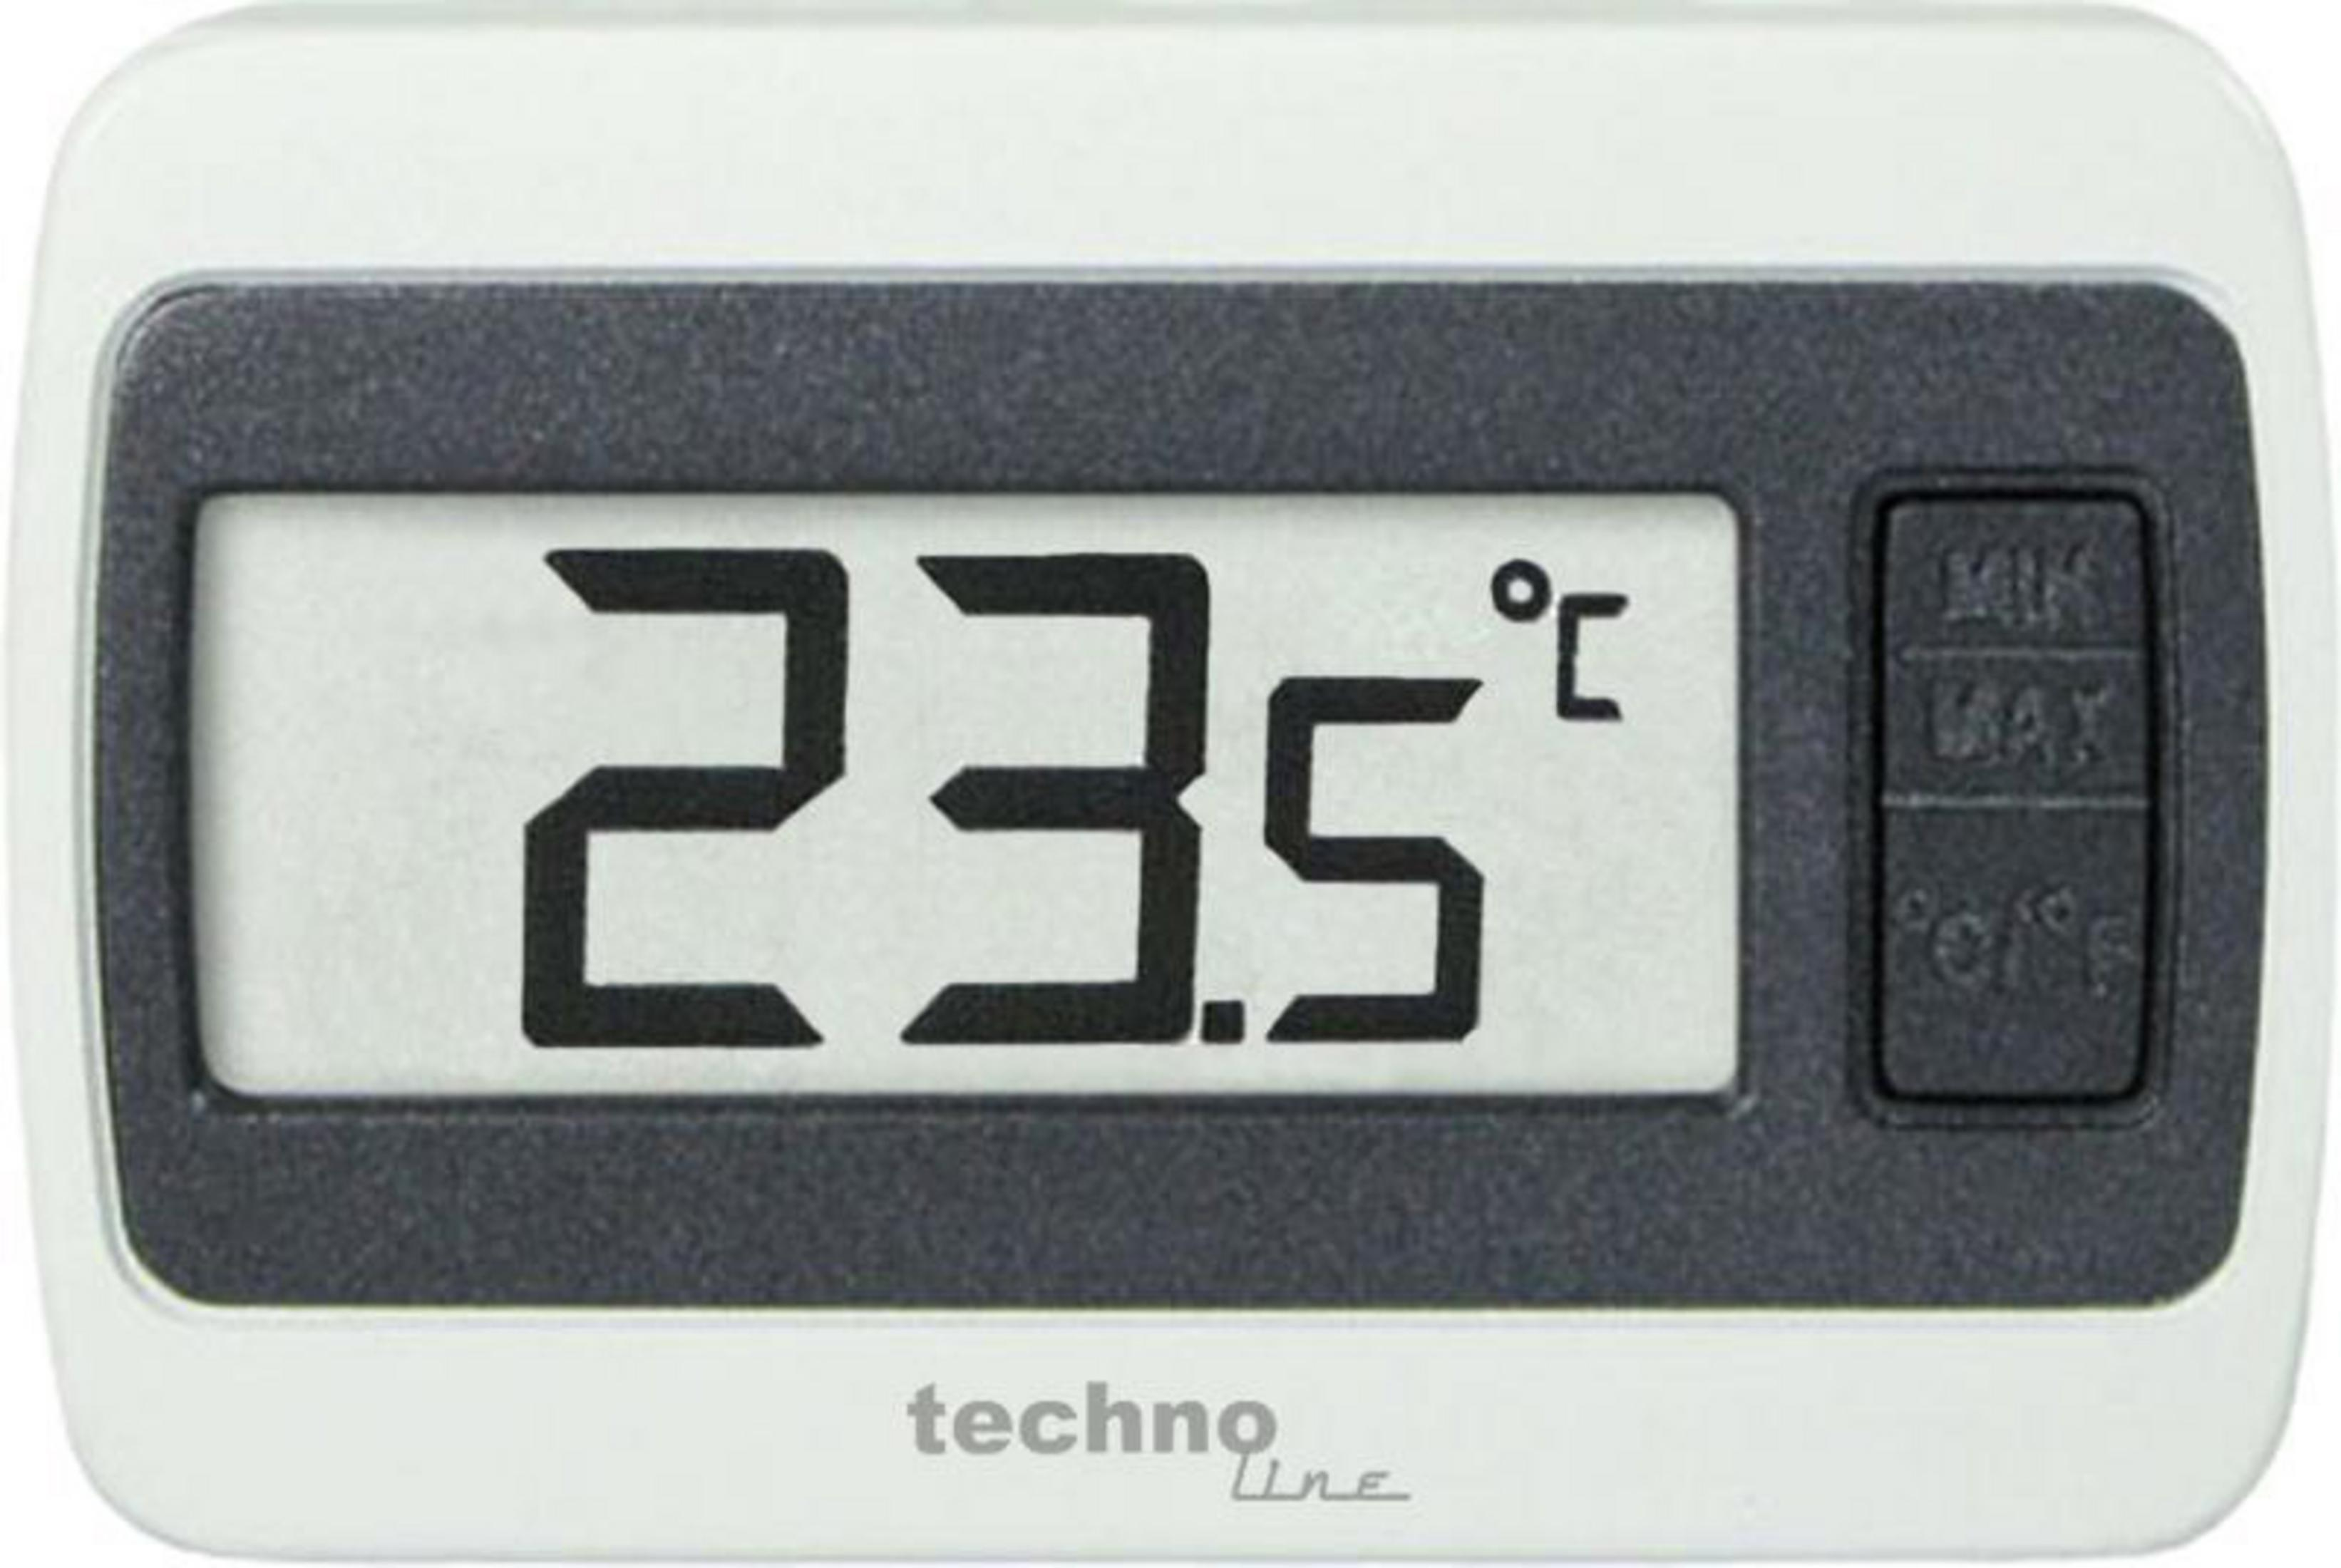 TECHNOLINE WEISS Thermometer 7002 WS